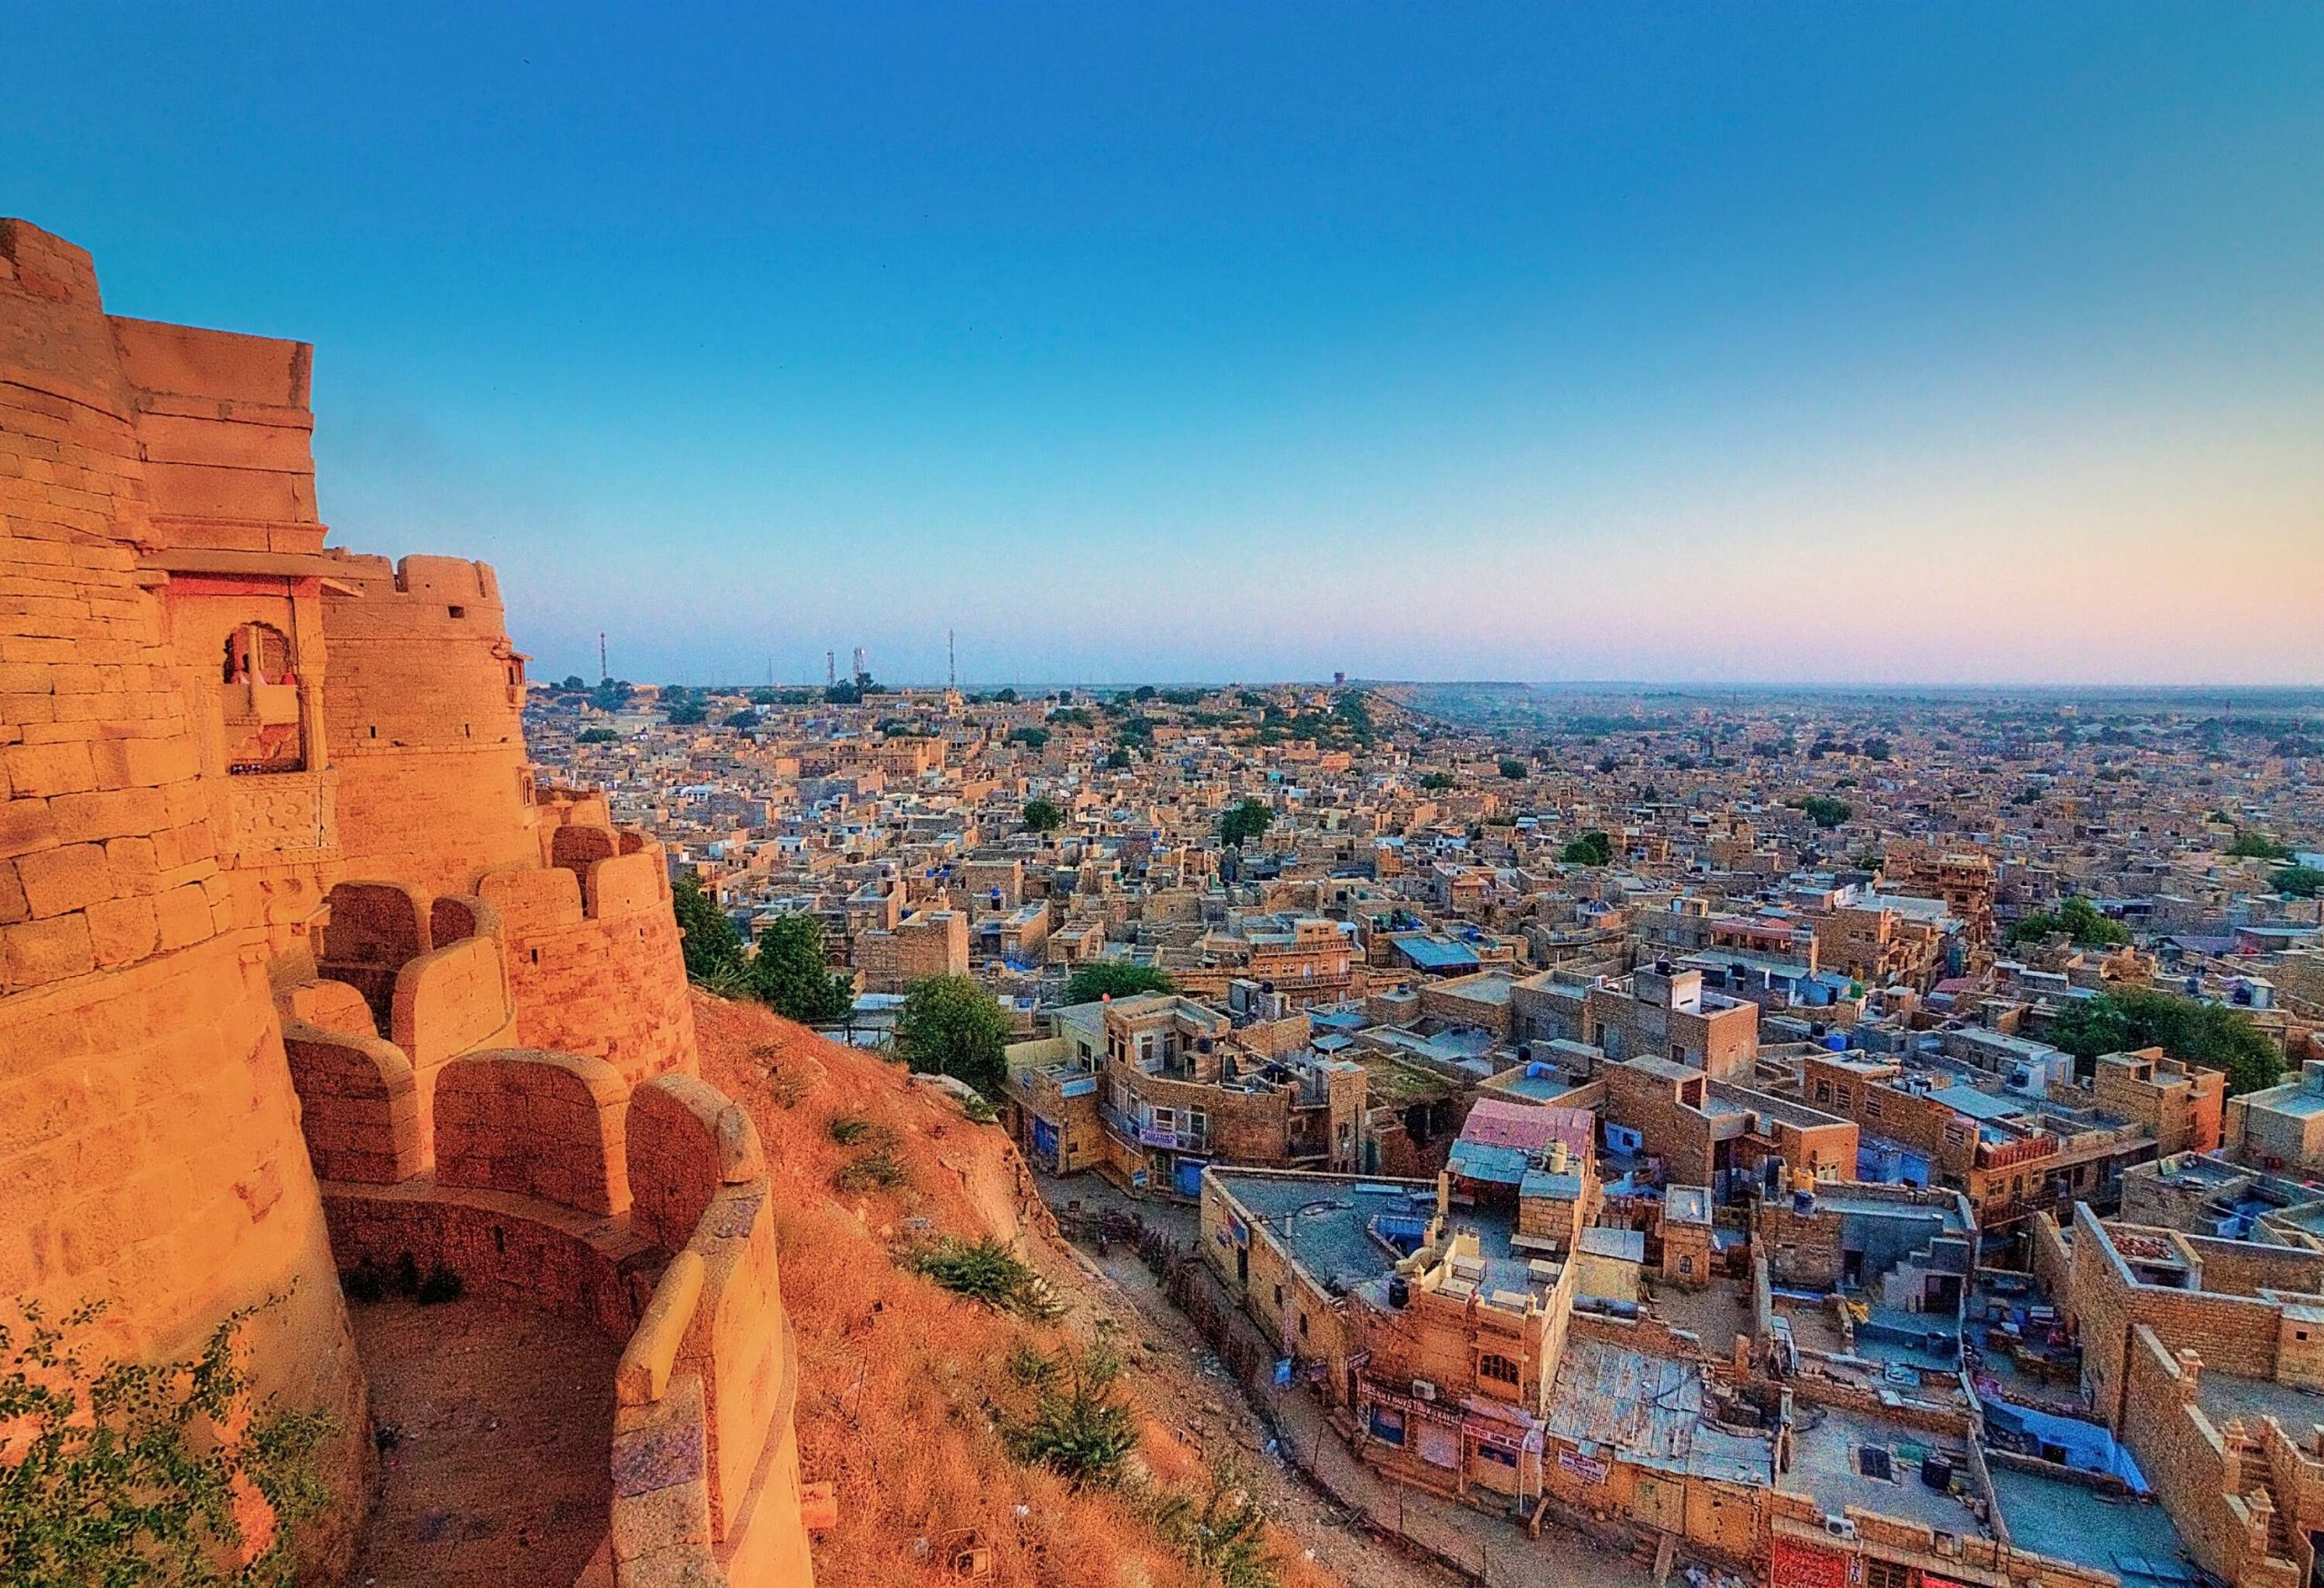 A brown brick fortress overlooking the ancient buildings and dwellings sprawled across the cityscape.